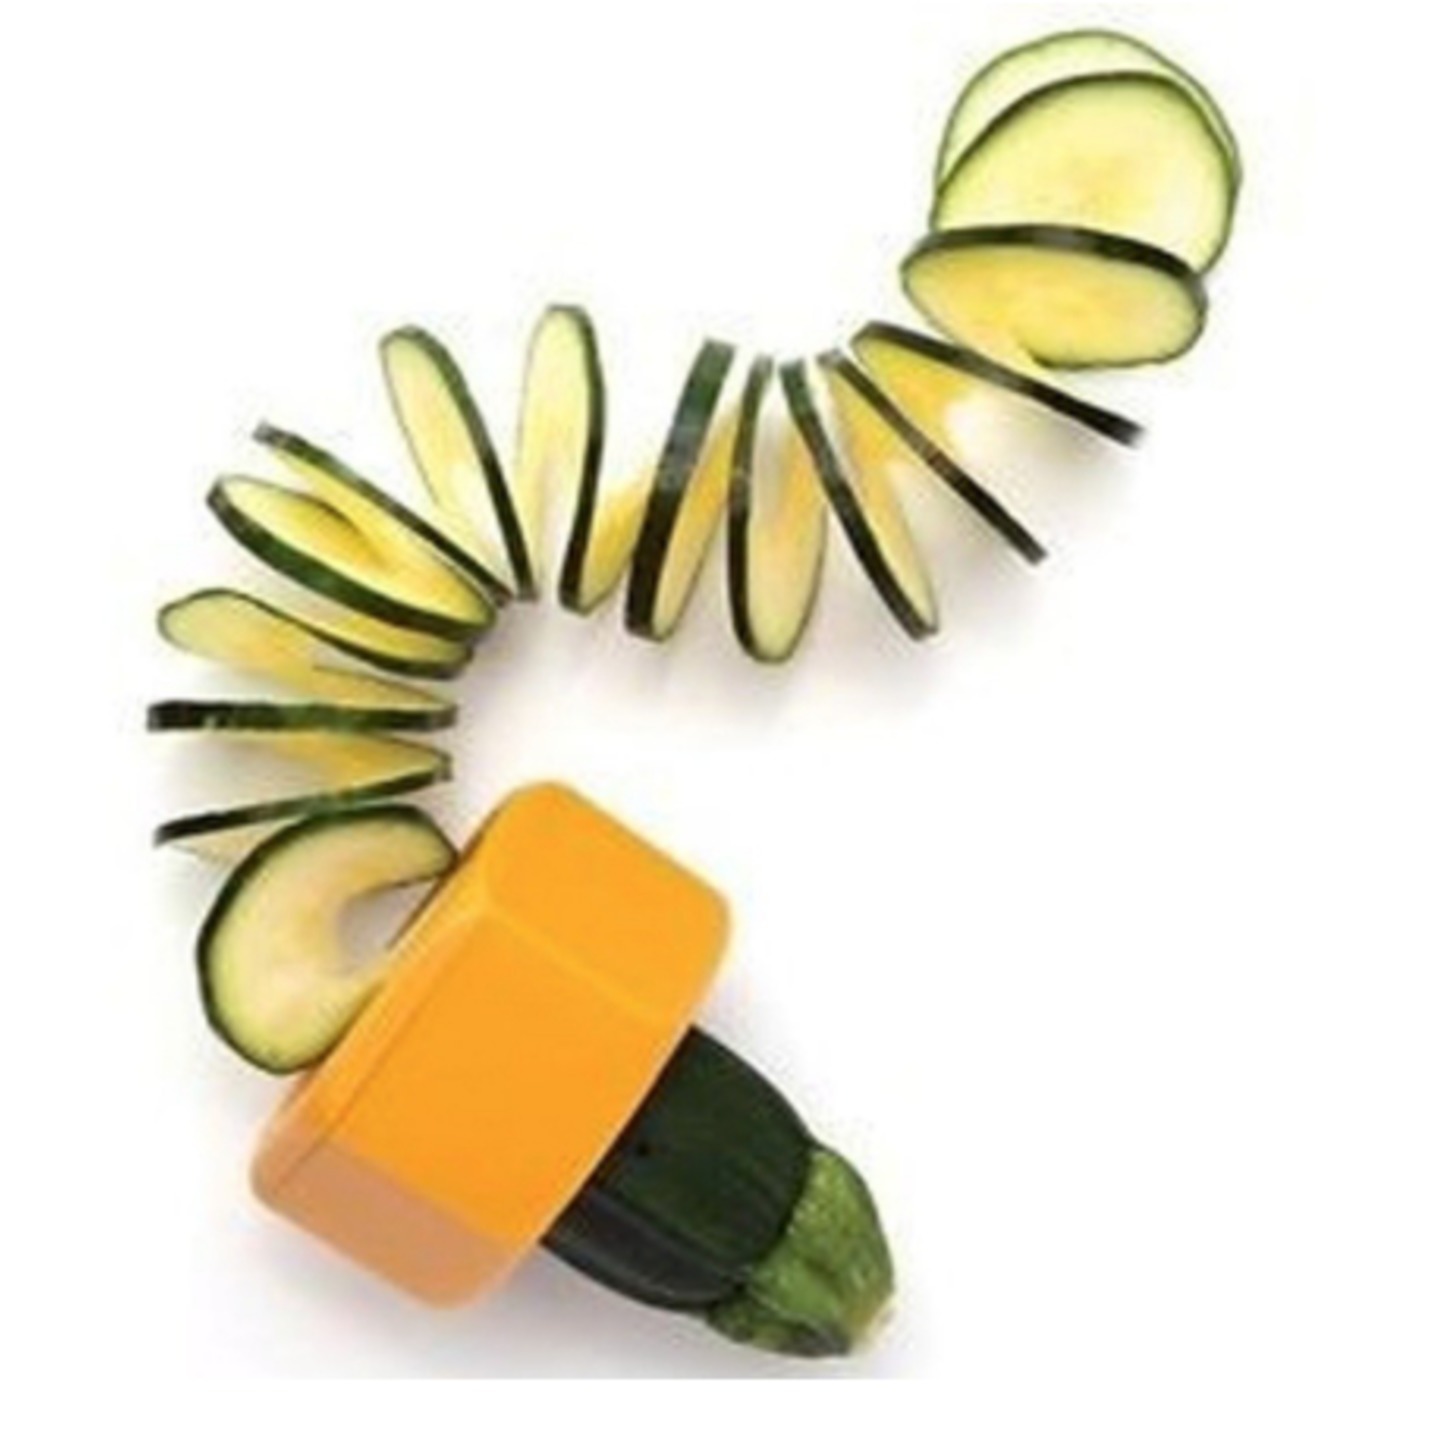 JonPrix 1 PC, Spiral Slicer Ideal for Vegetables, Cucumbers and Zucchini